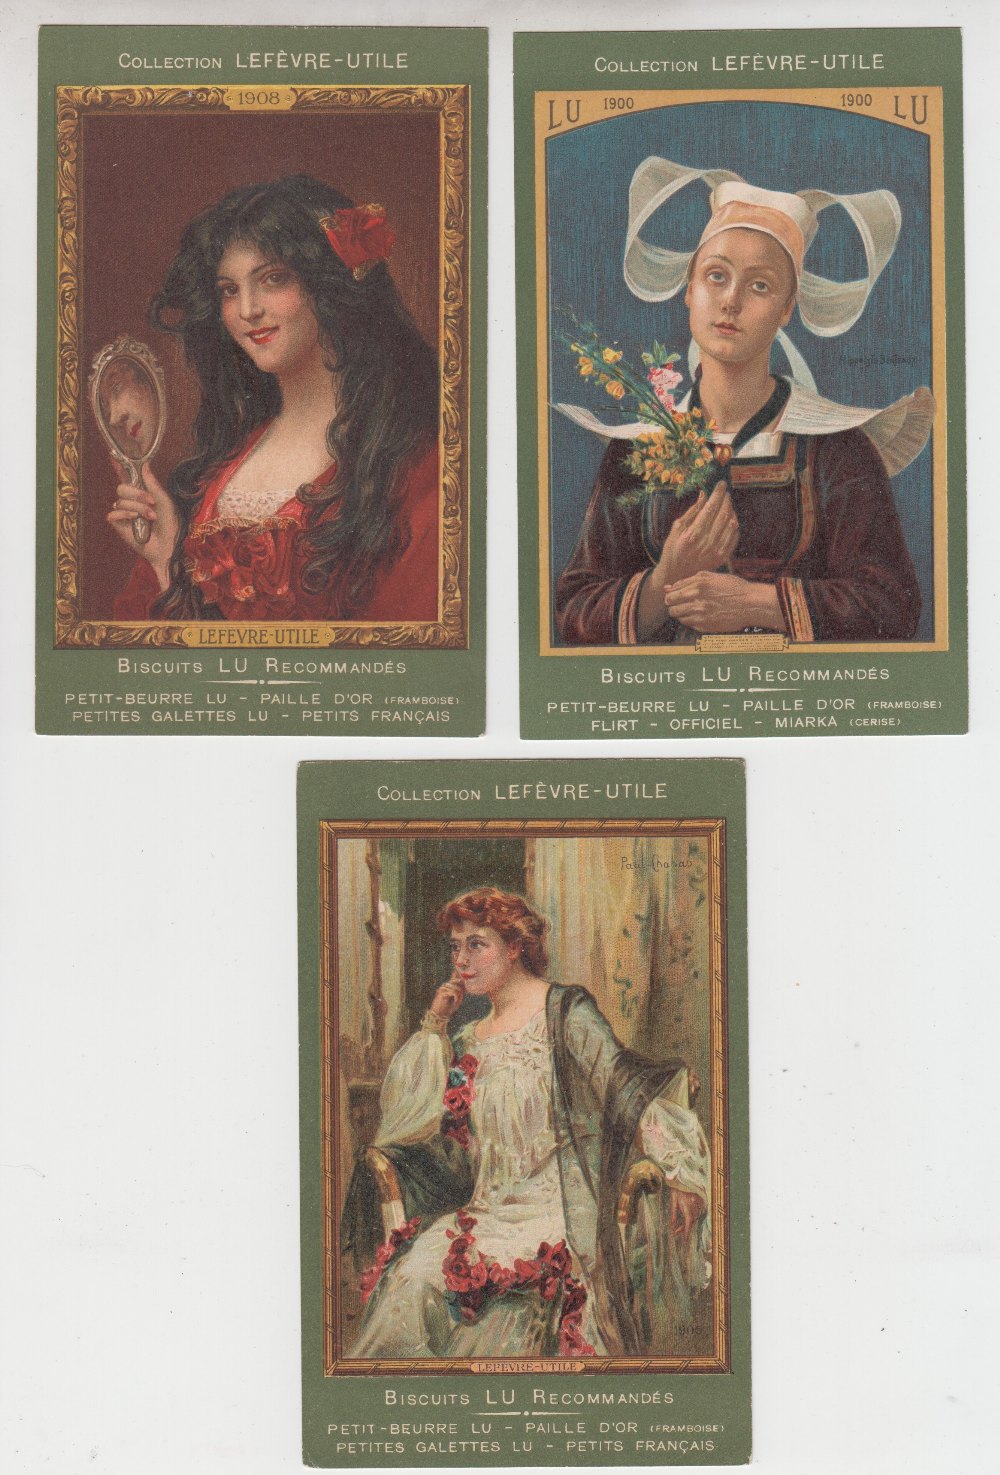 Postcards, Advertising, Lefevre-Utile, three cards, LU 1900 by Berteaux & 1905 & 1908 by Chabas, all